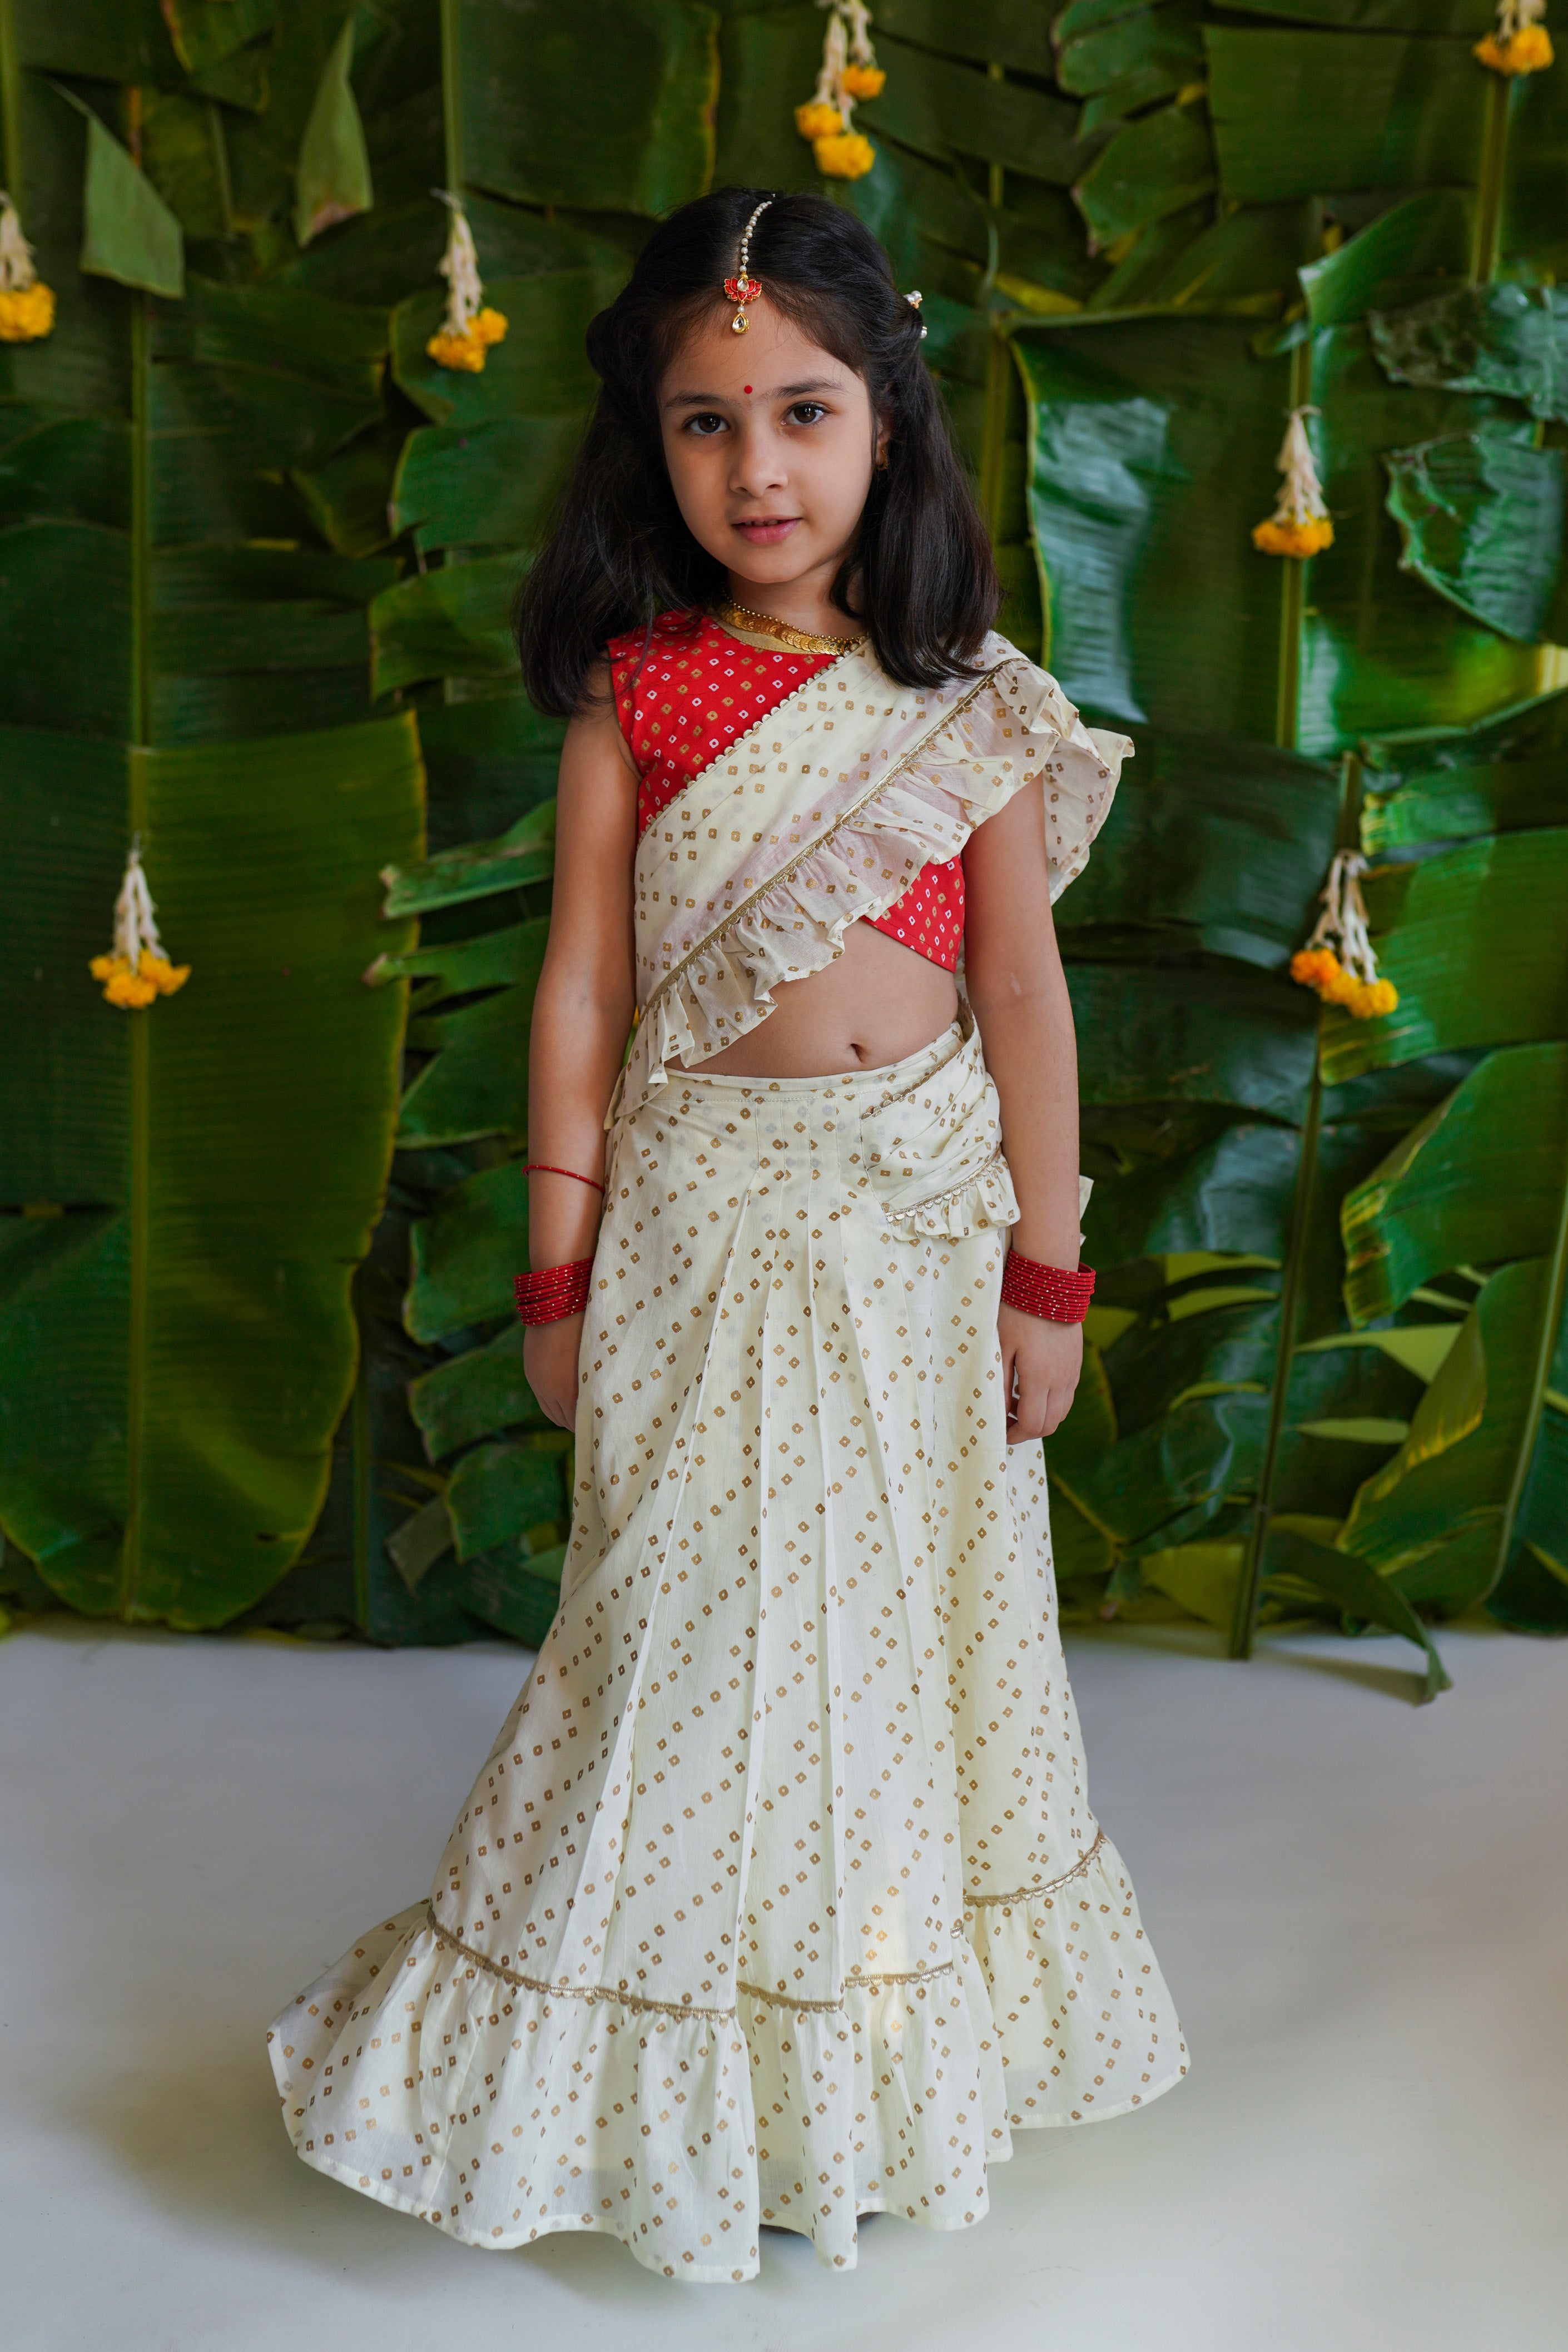 Buy Puja Special Lehenga Saree For Baby Girl at Amazon.in